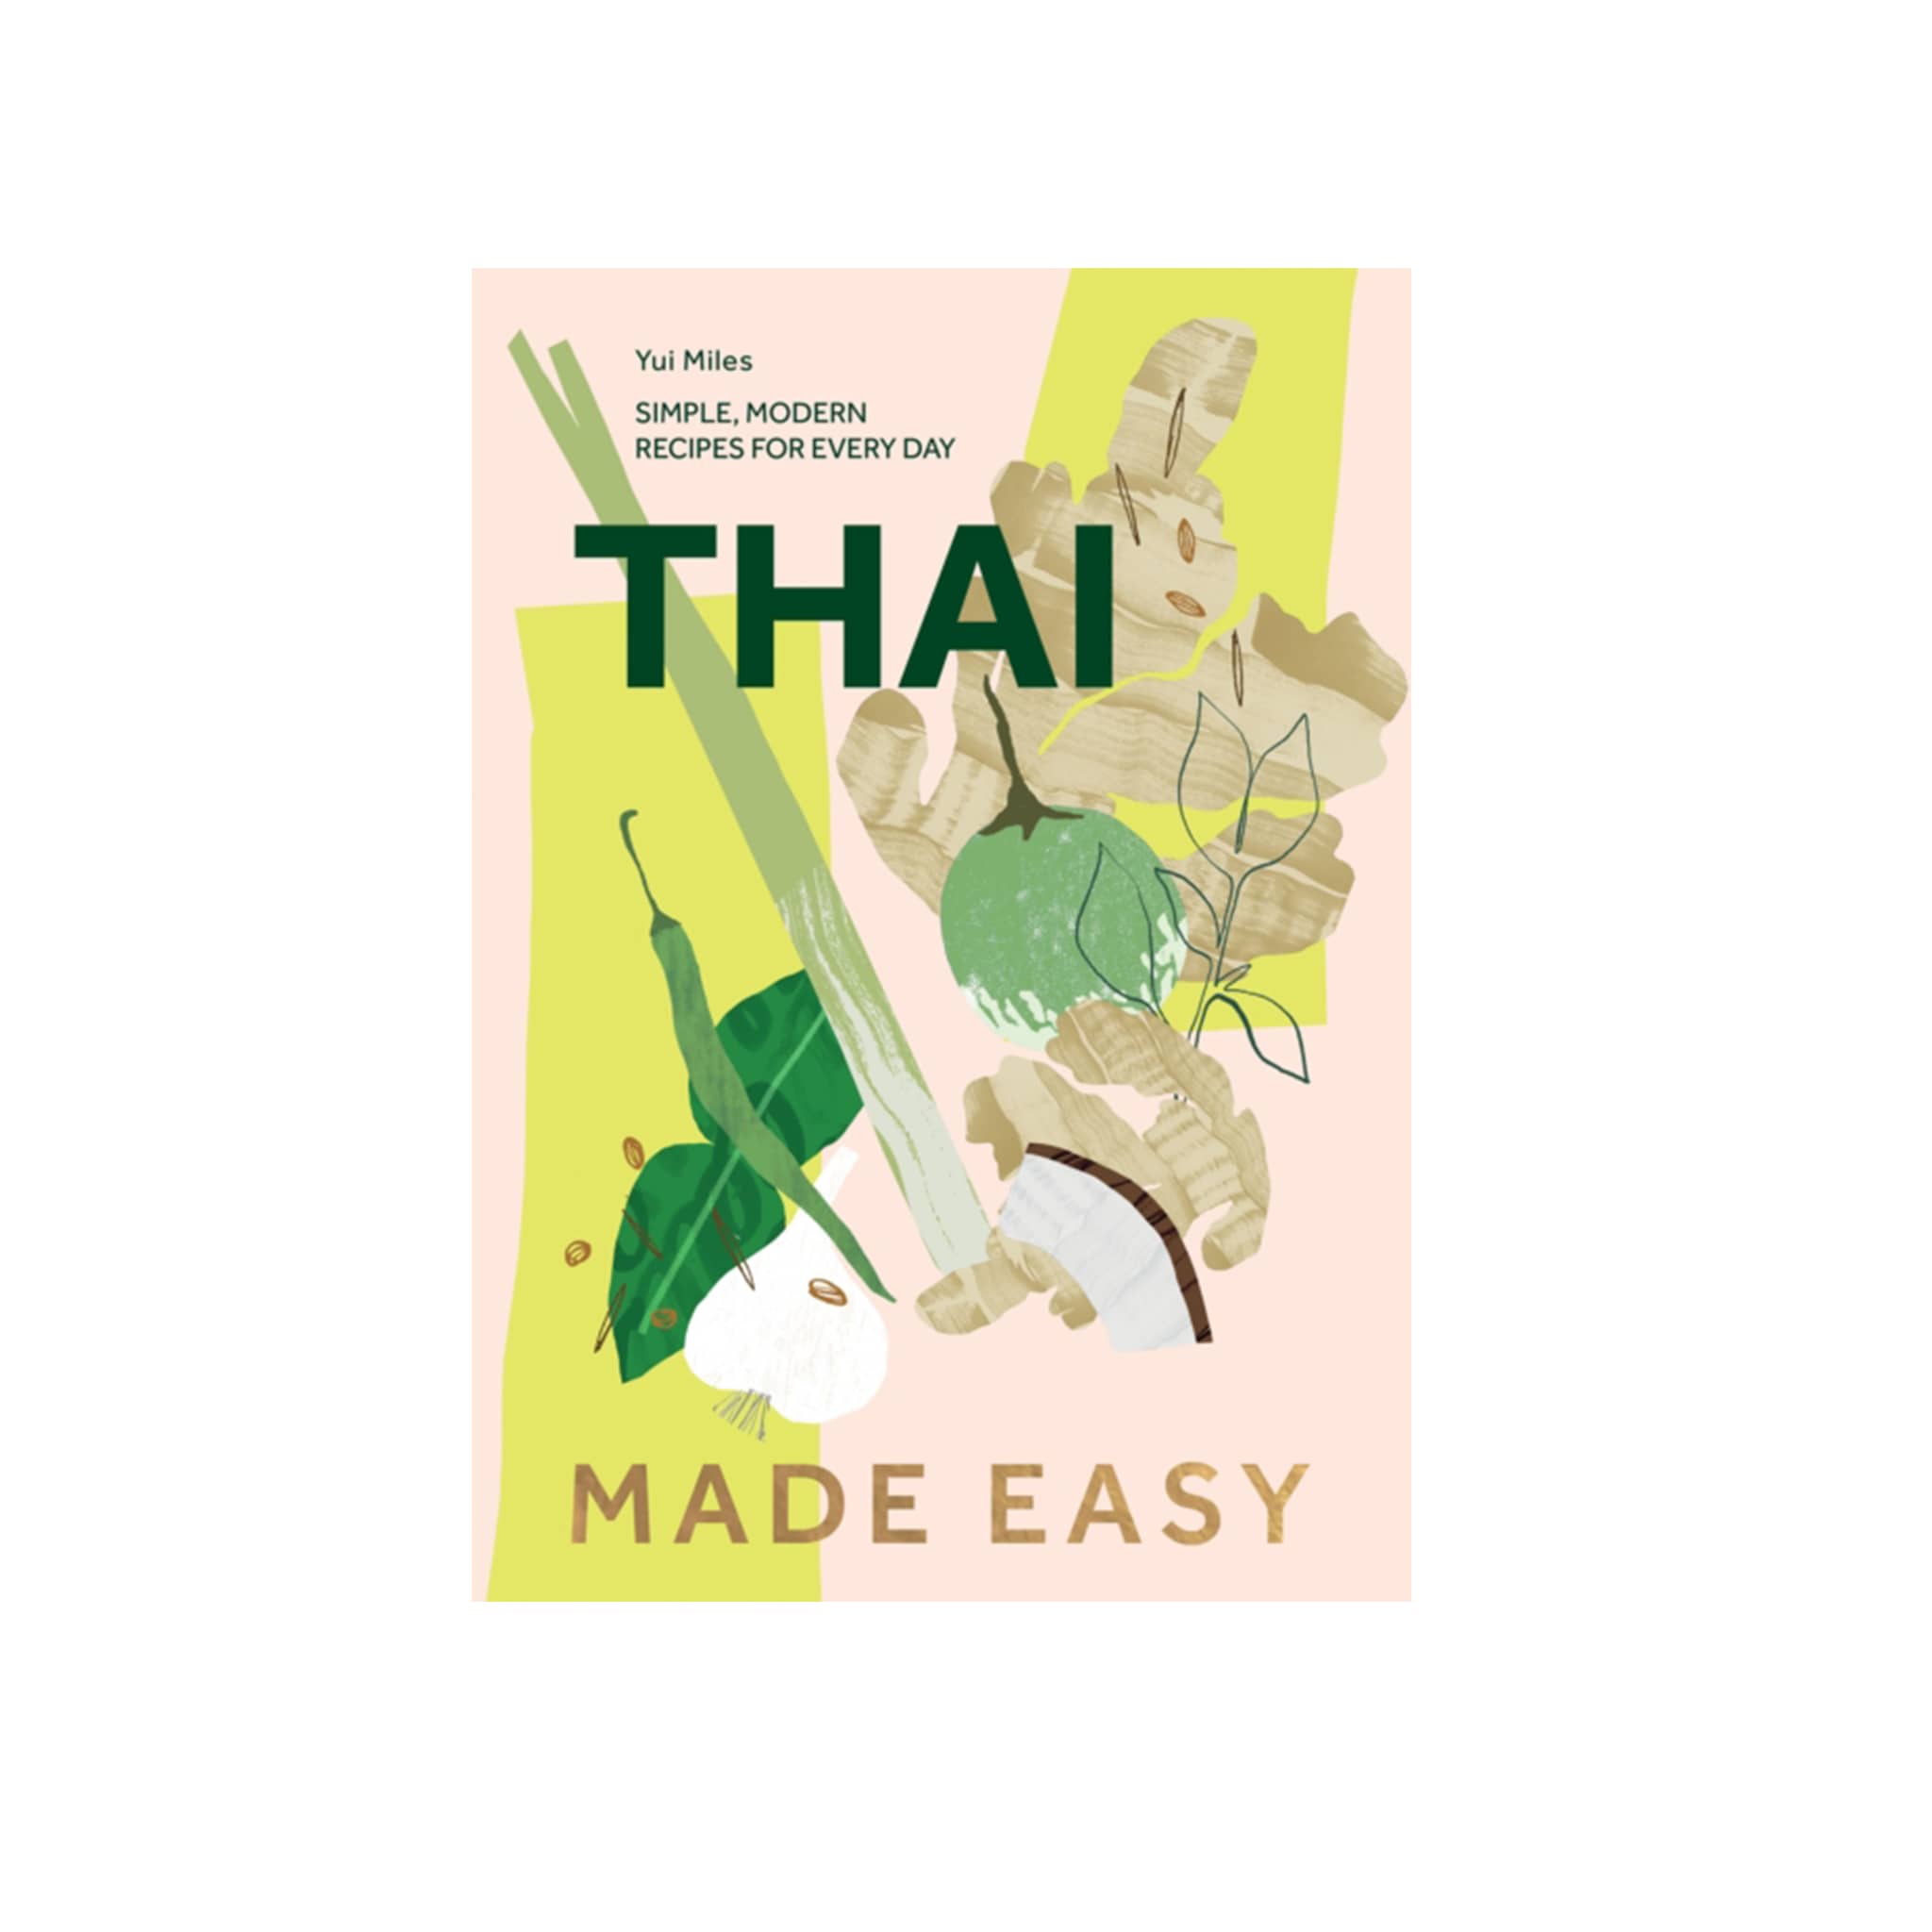 Thai Made Easy, by Yui Miles